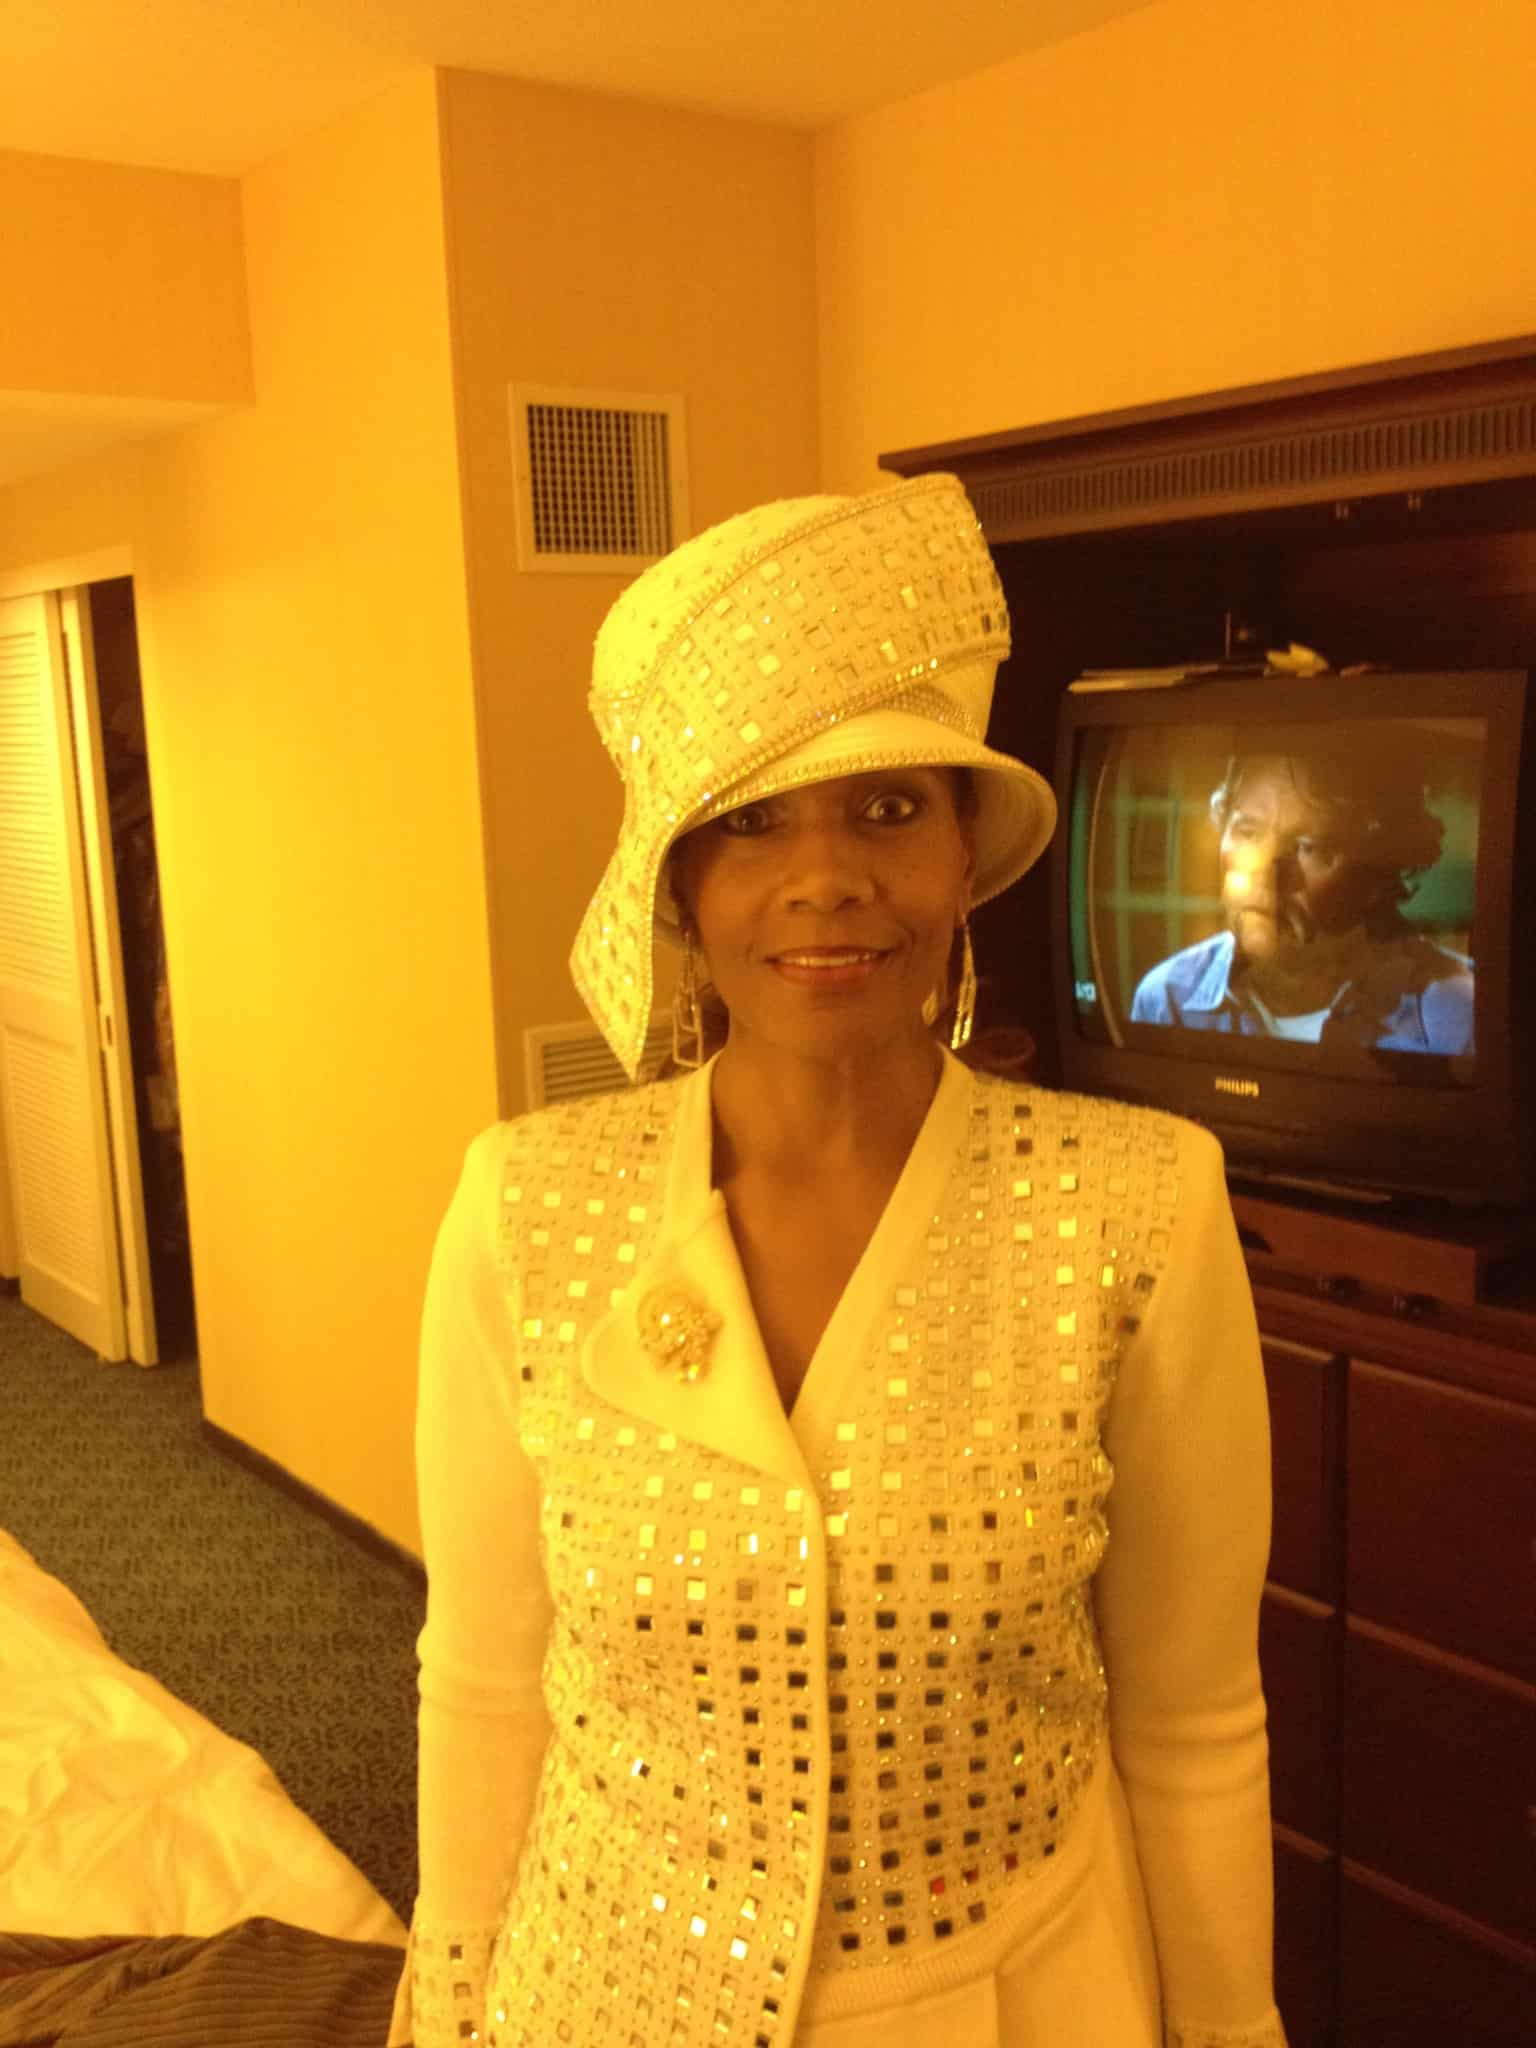 Ashro Woman of the Week, Dr. Angela, a black woman in a cream hat with gold polka dots and matching suit.